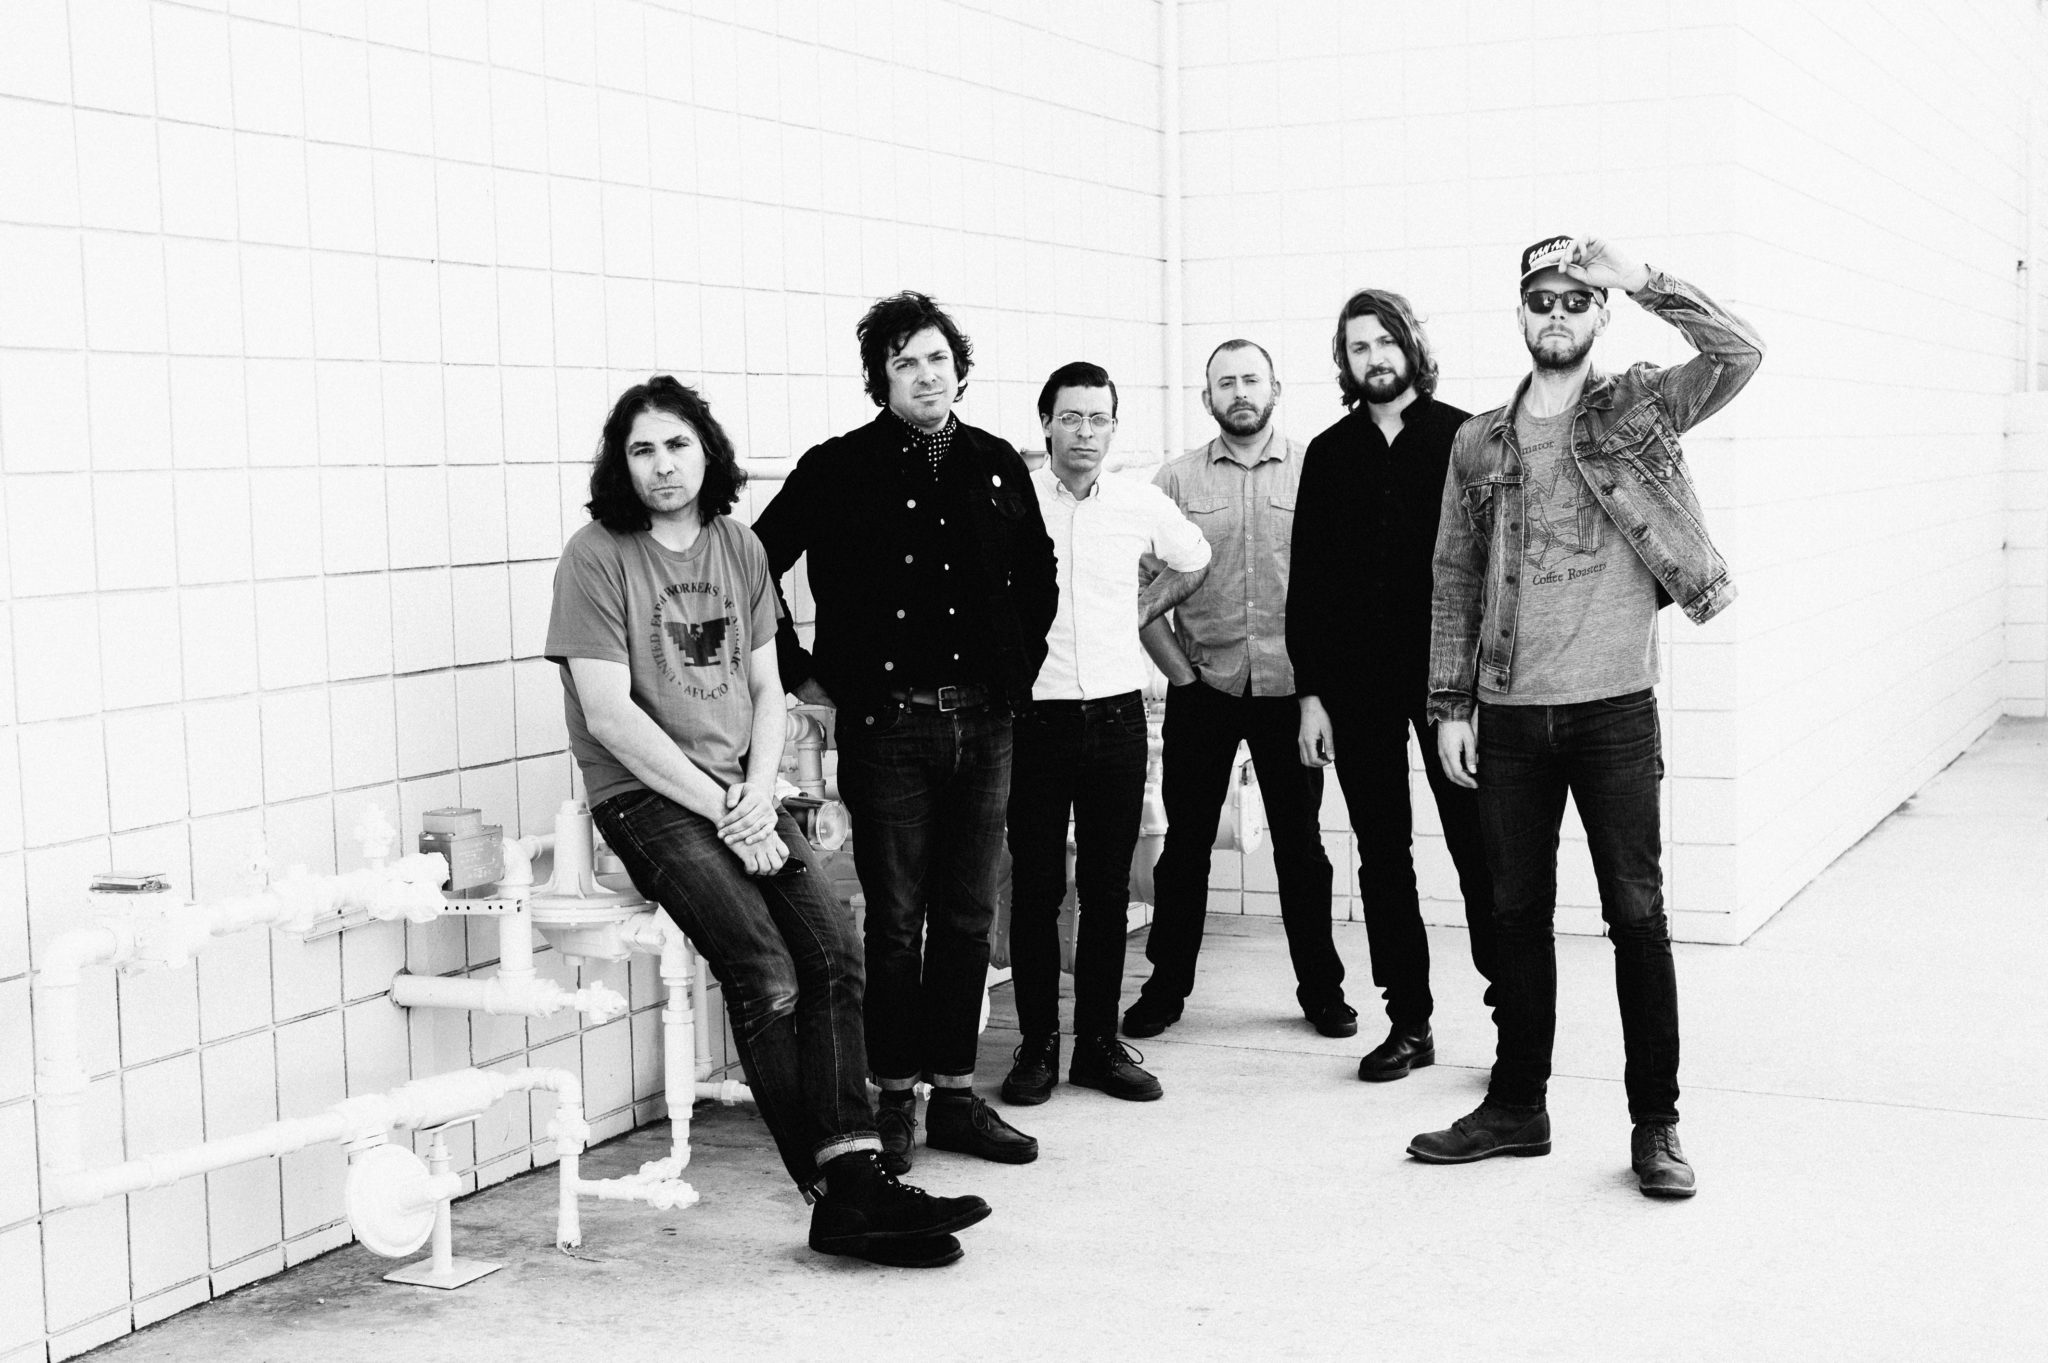 Throw It In Cruise Control For The War on Drugs New Track “Holding On”